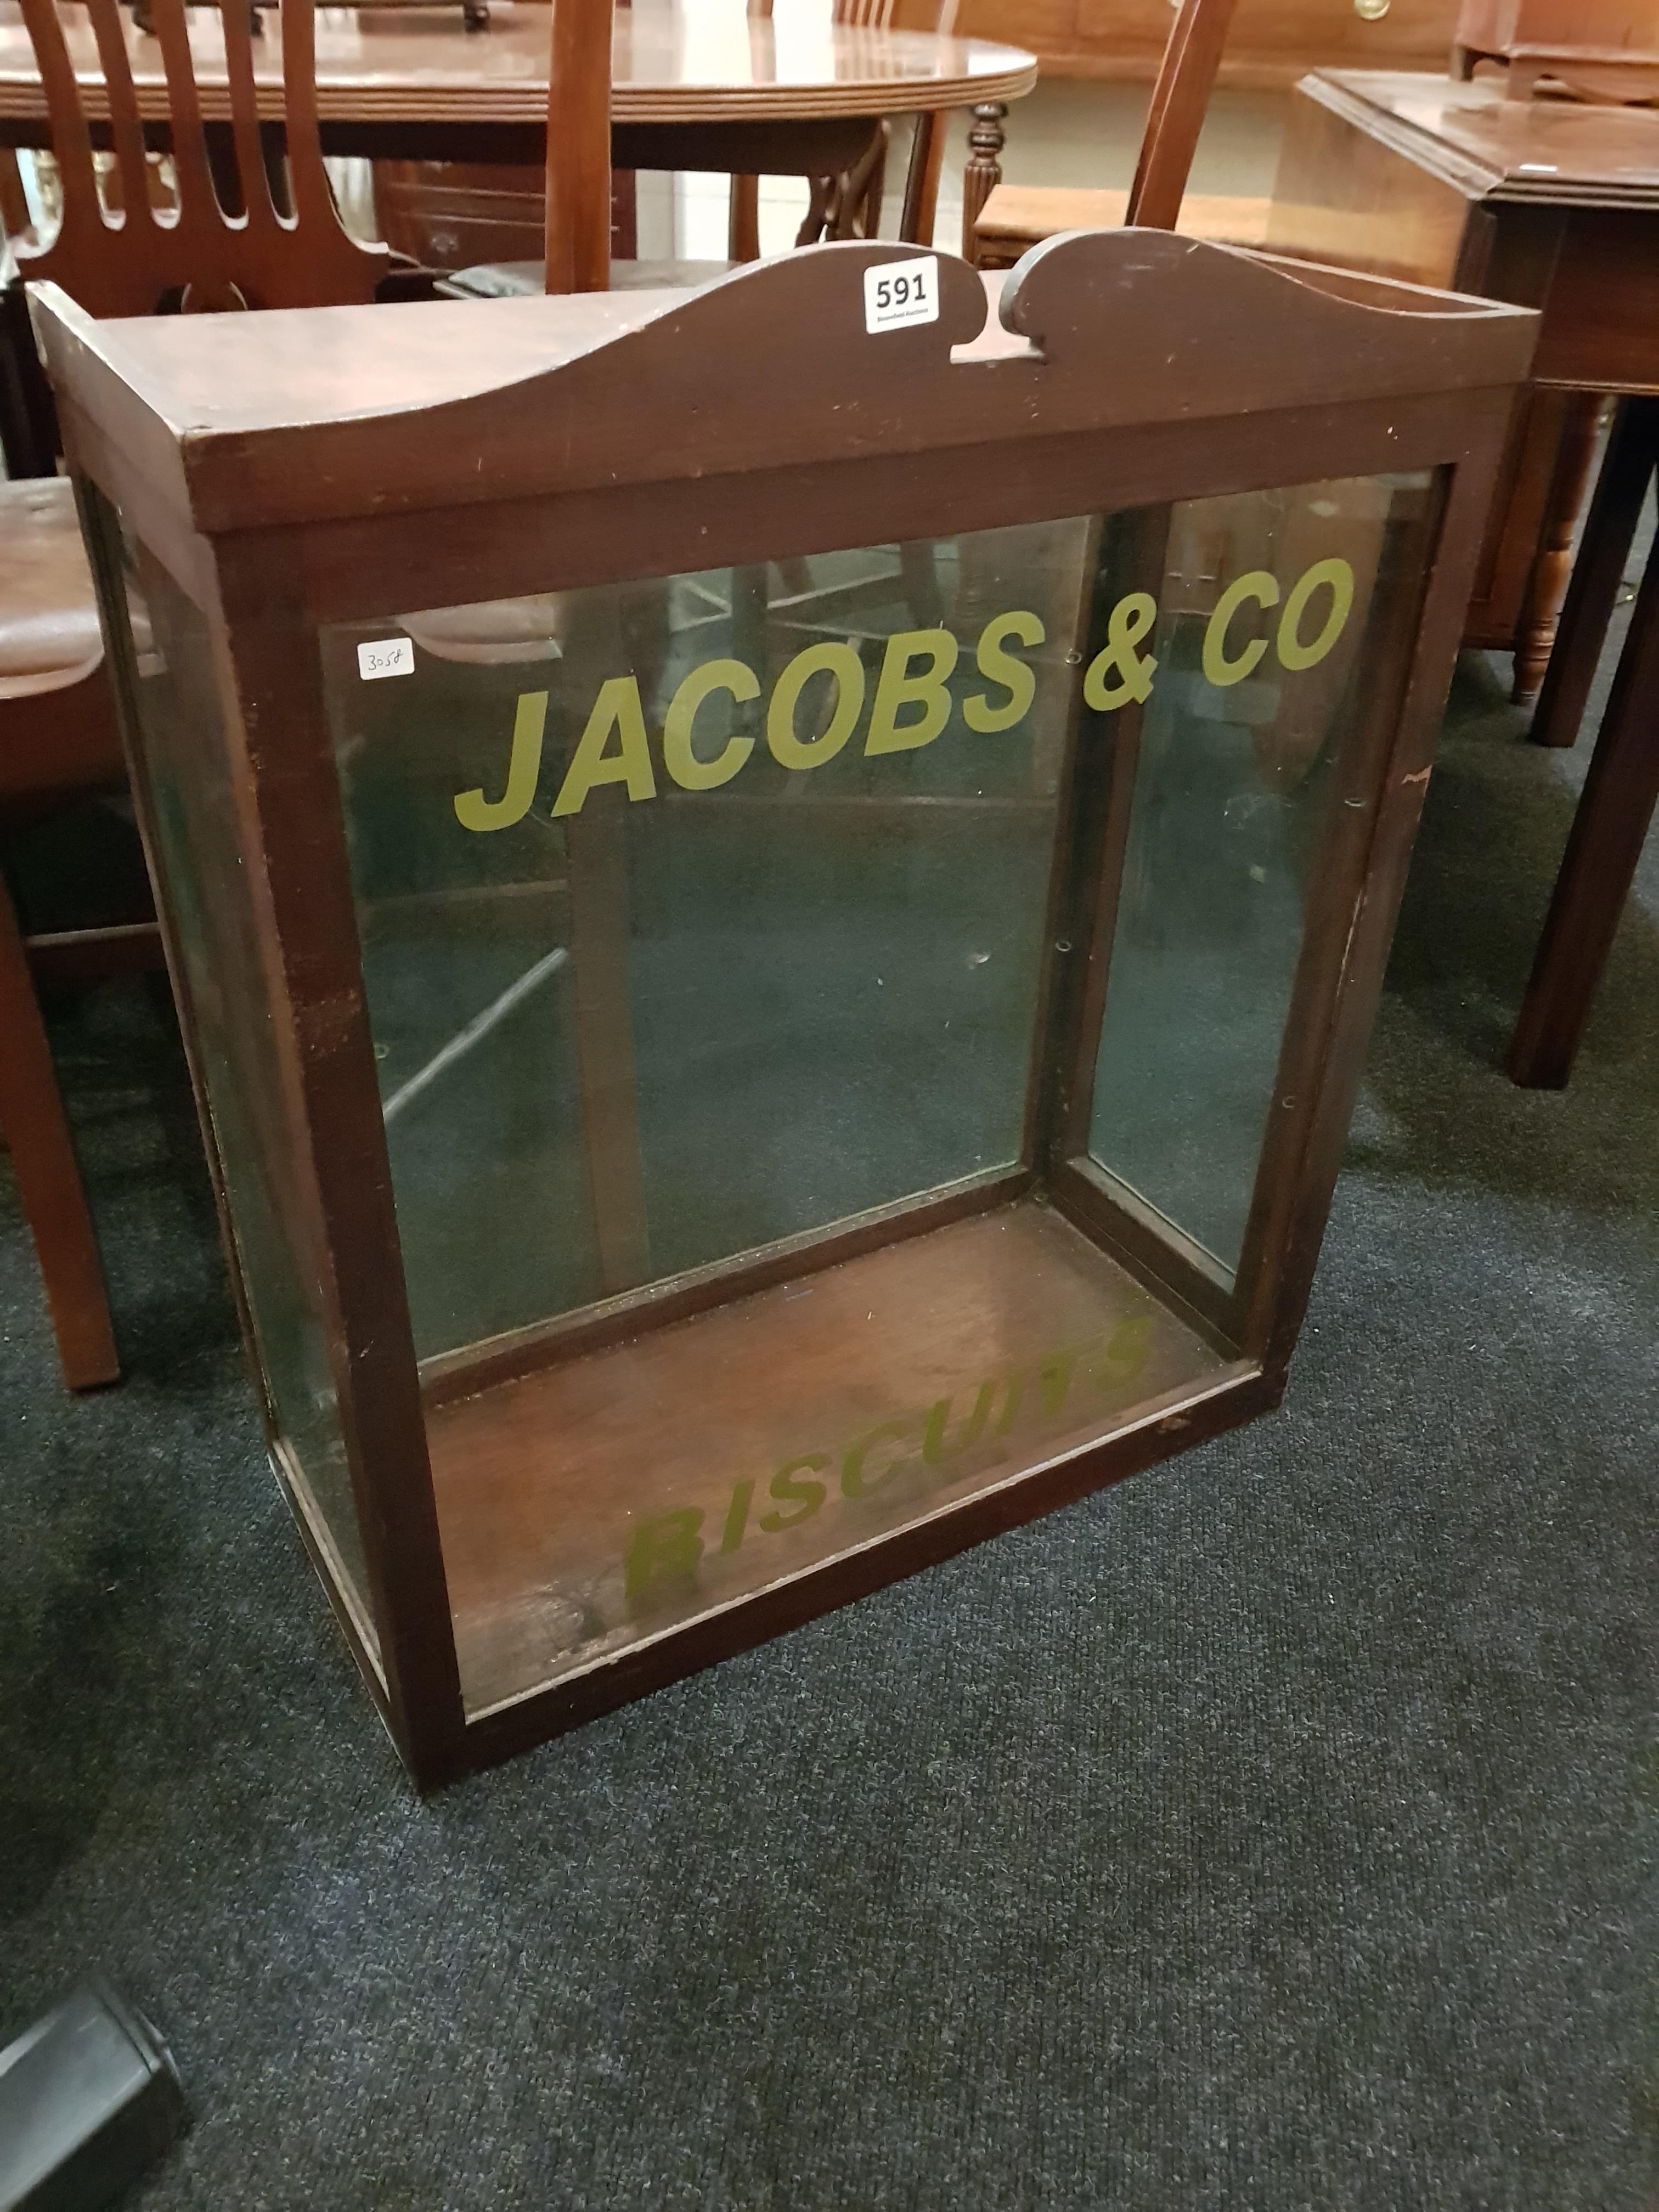 ANTIQUE GLAZED JACOBS & CO BISCUITS DISPLAY CABINET